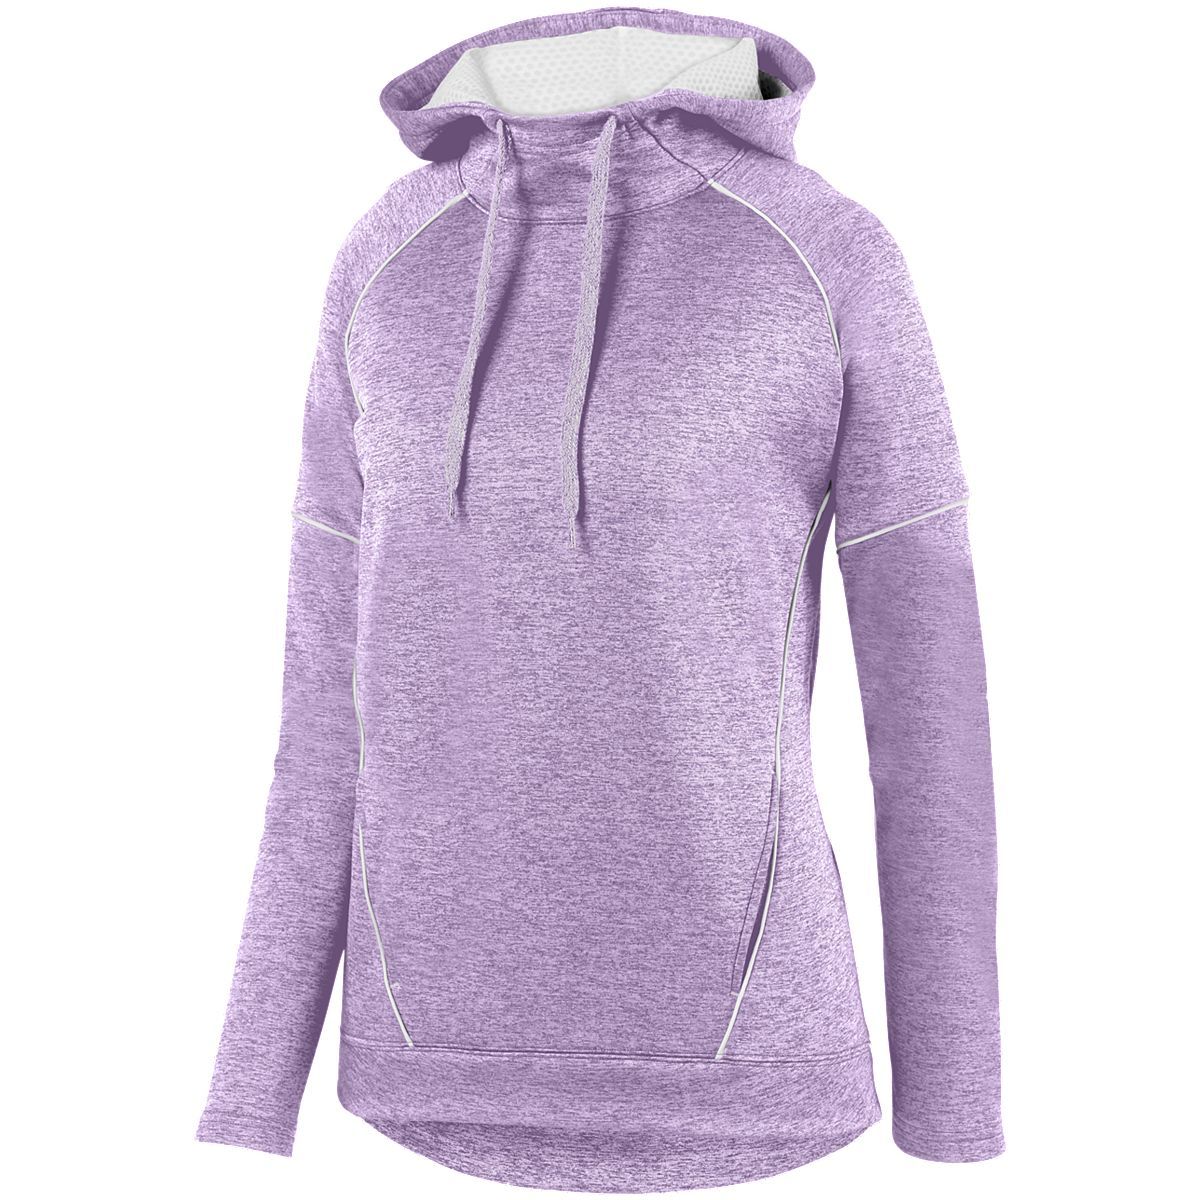 Augusta Sportswear Ladies Zoe Tonal Heather Hoodie in Light Lavender/White  -Part of the Ladies, Augusta-Products, Shirts, Tonal-Fleece-Collection product lines at KanaleyCreations.com